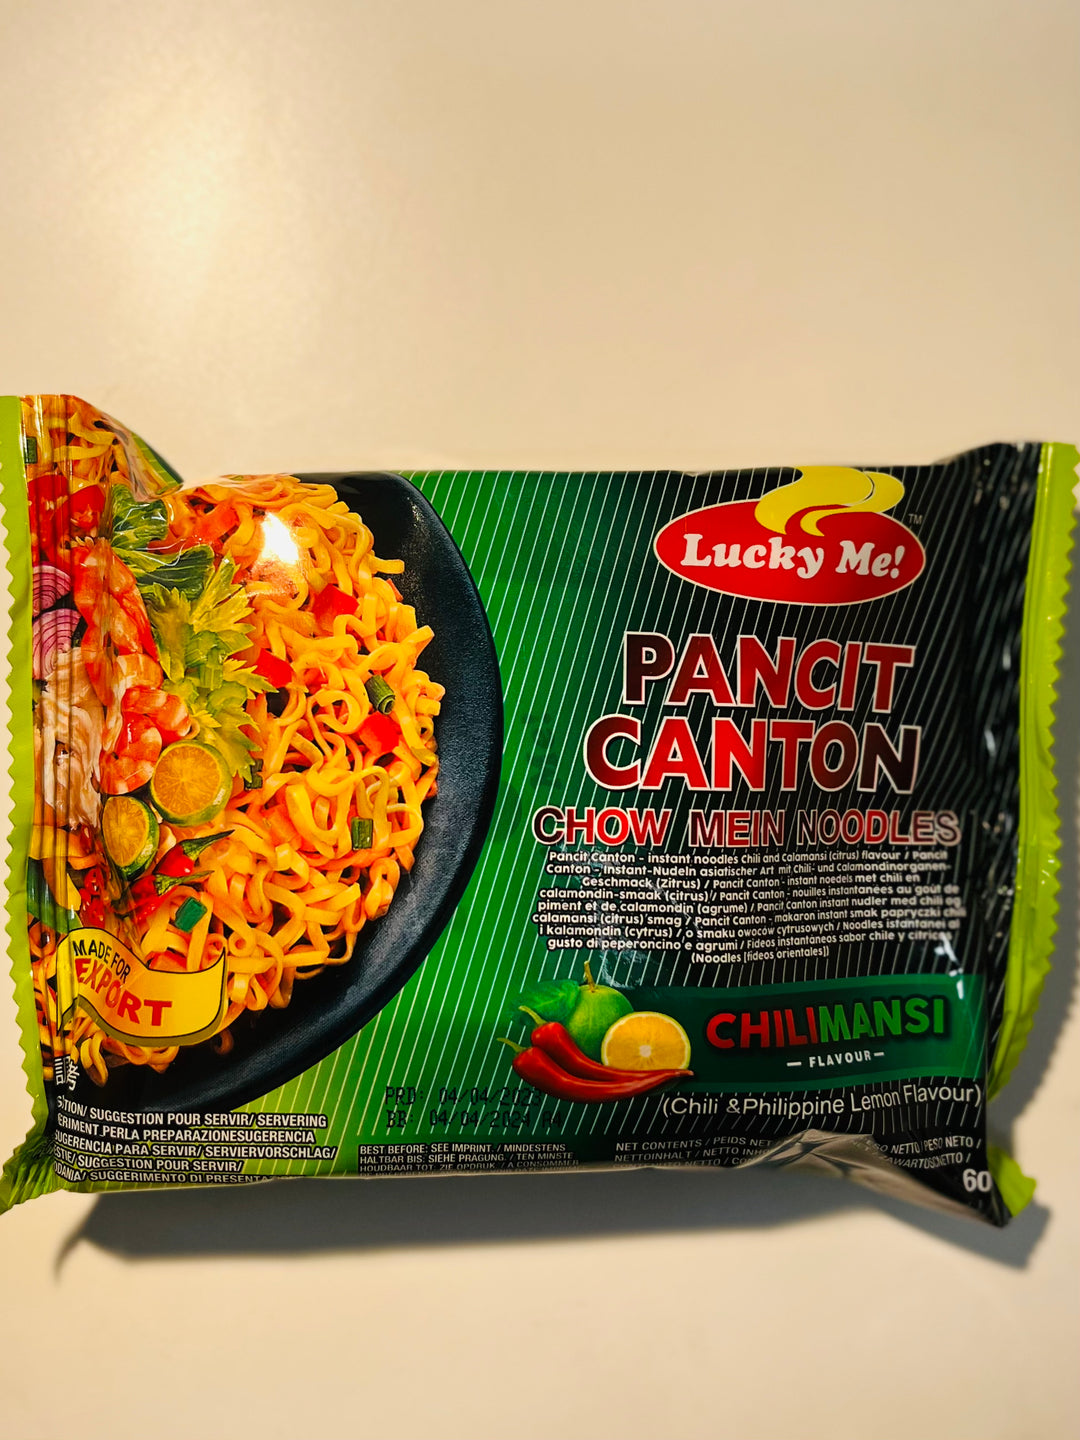 Lucky Me! Pancit Canton Chilimansi Noodle 55g